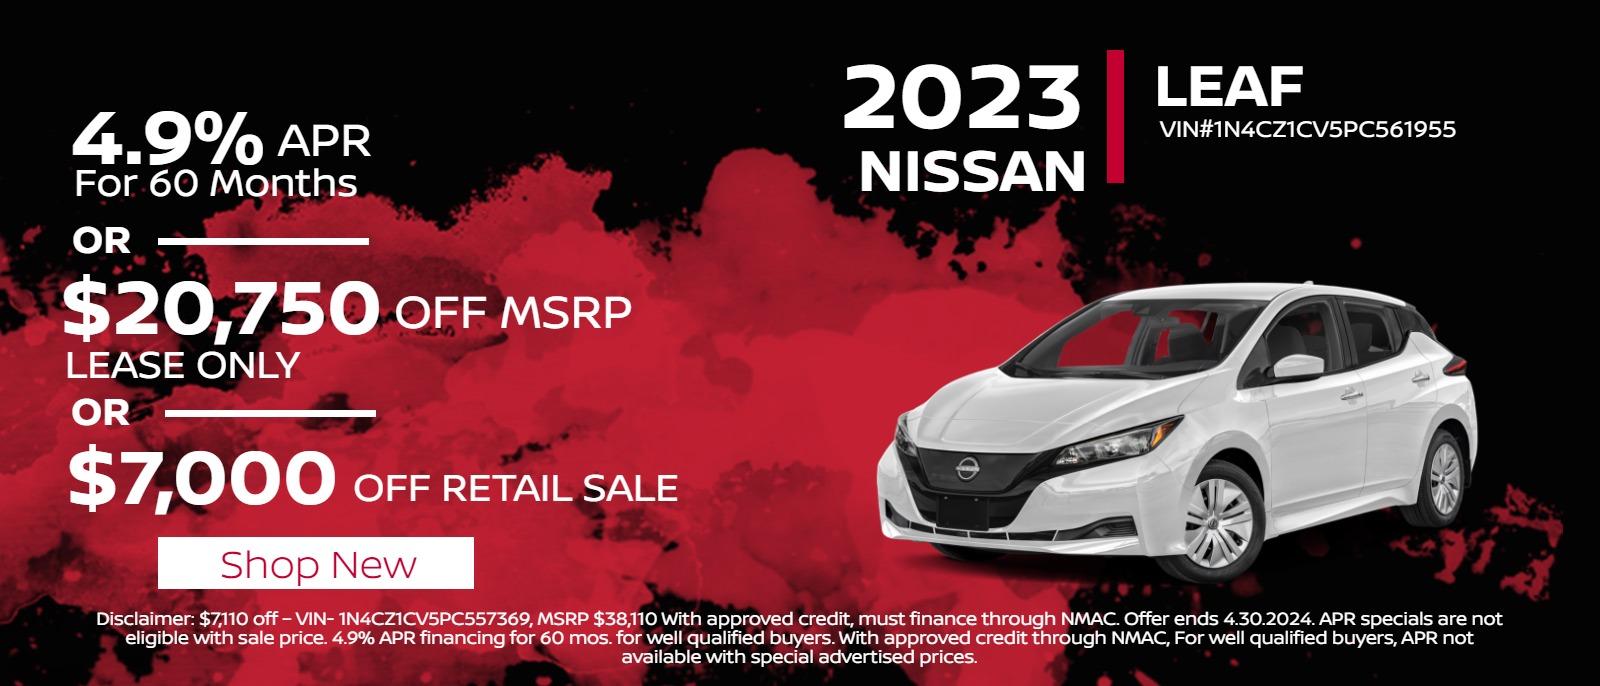 2023 Leaf 
4.9% APR for 60 months
 or 
$20,750 off MSRP 
lease only 
or 
$7,000 off retail sale